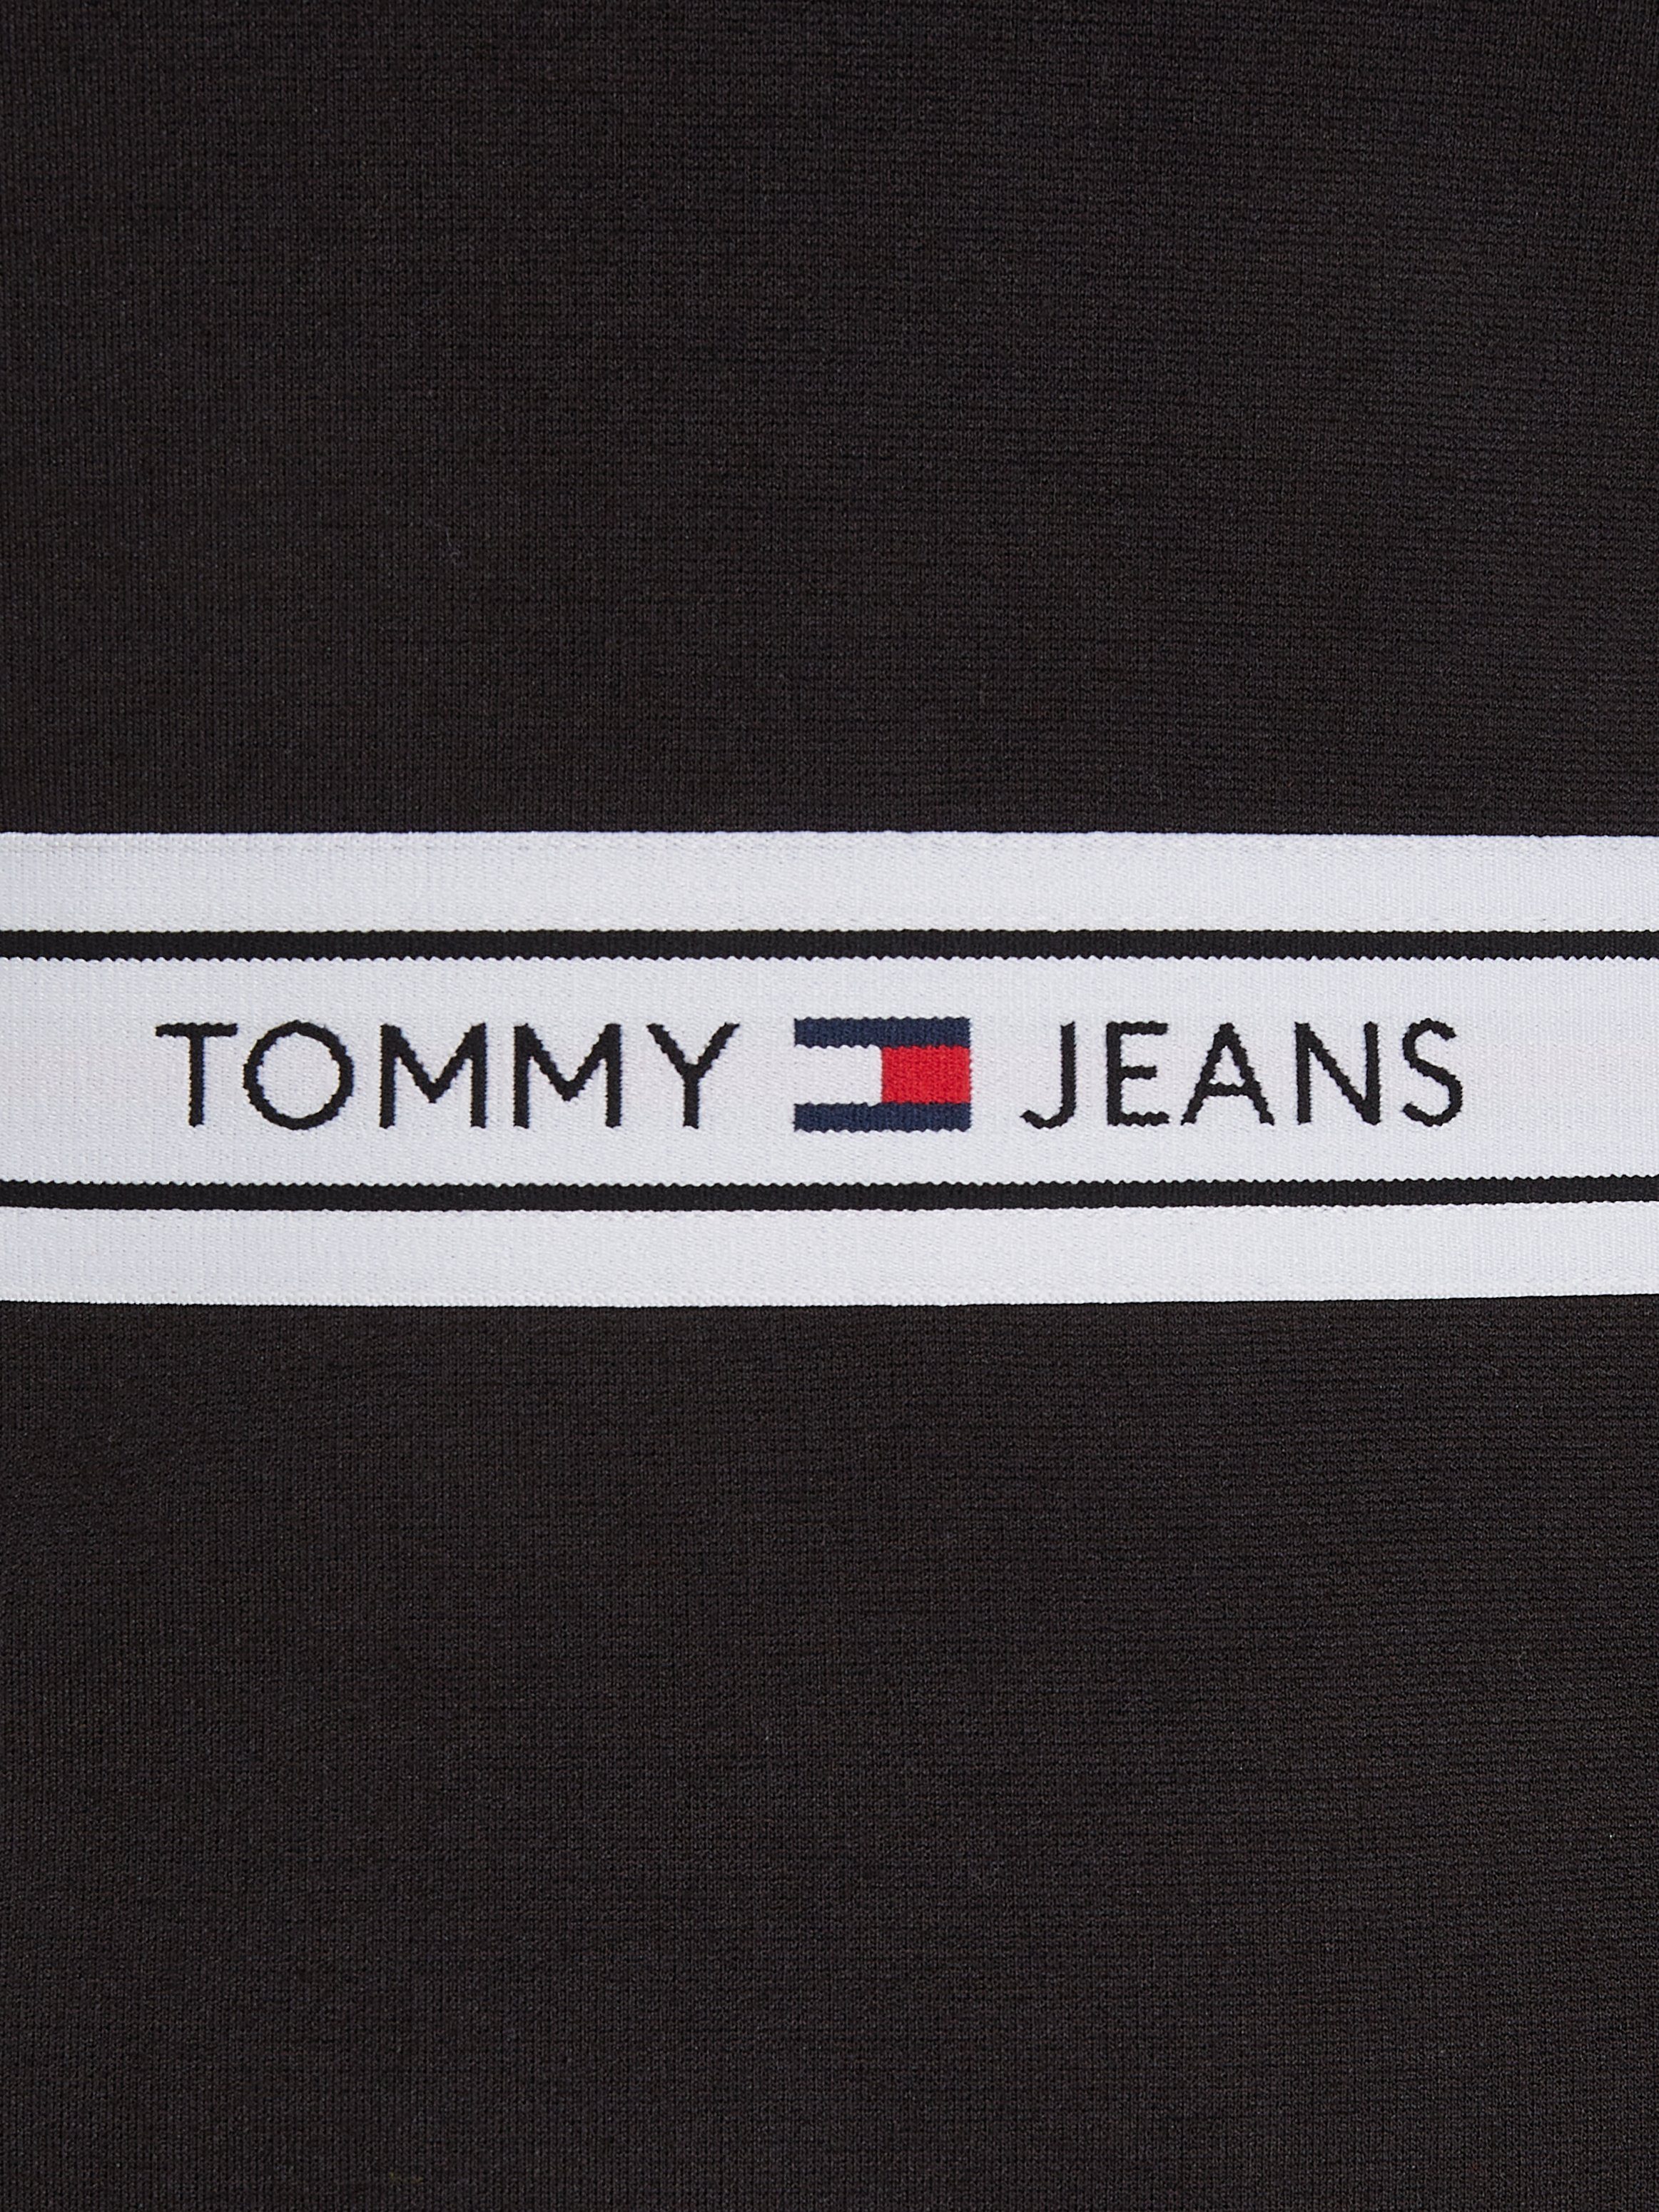 TOMMY JEANS Blousejurk TJW LOGO TAPE FIT & FLARE EXT